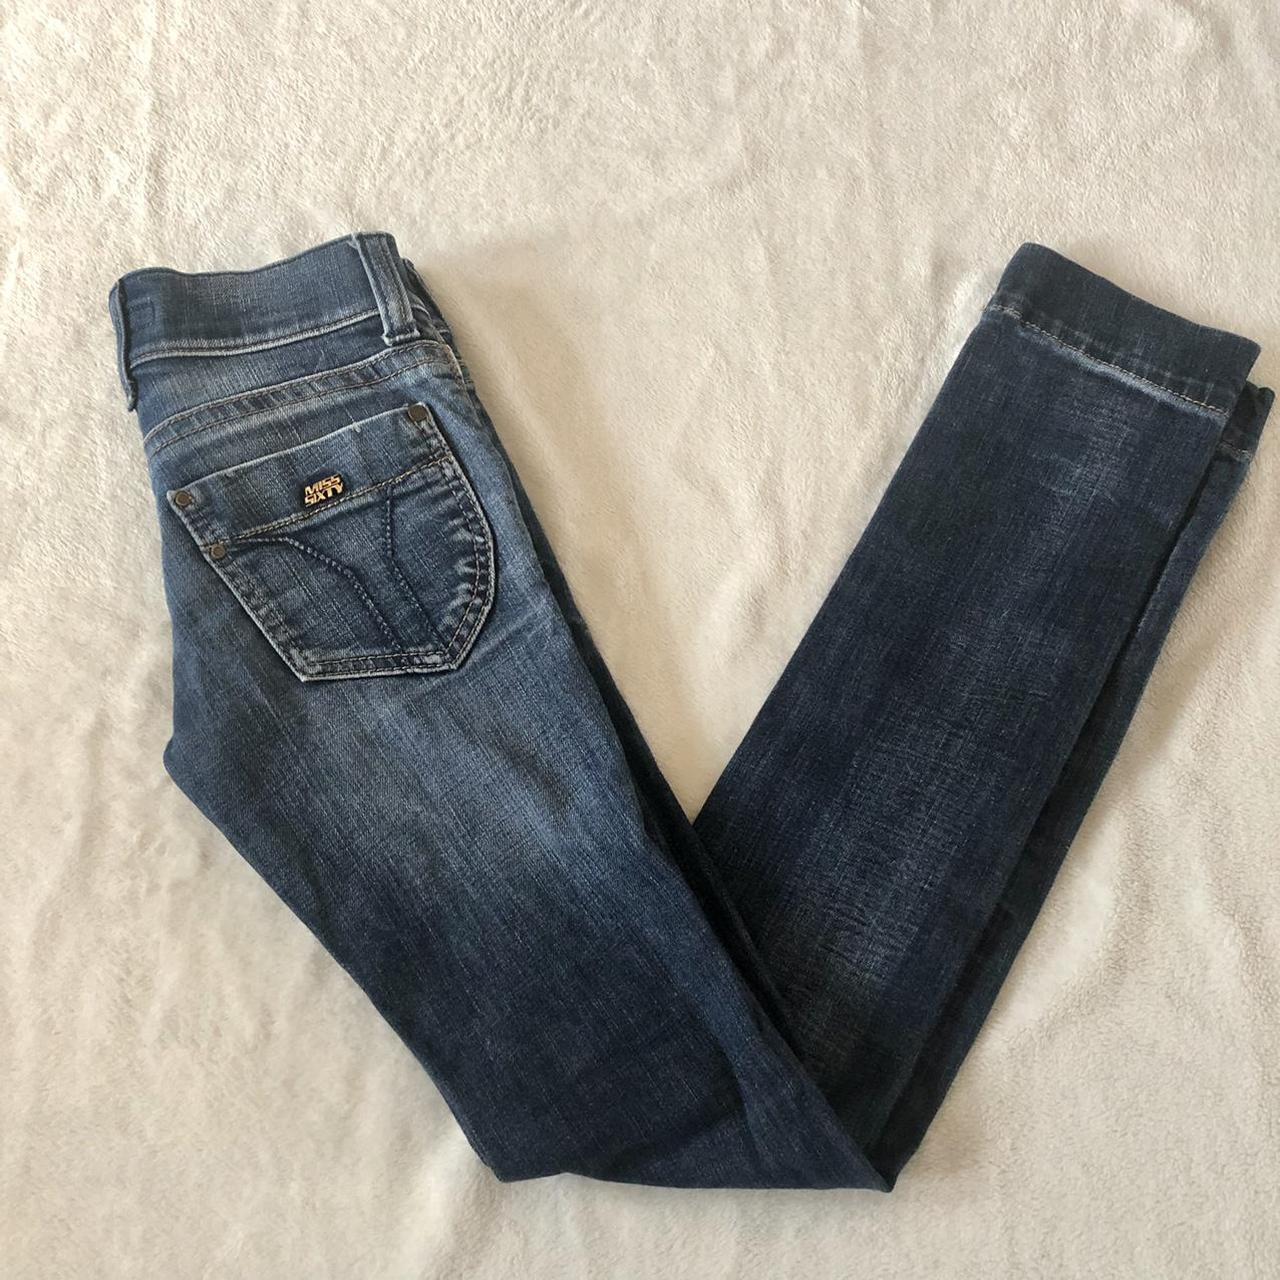 Miss Sixty Women's Blue and Navy Jeans | Depop